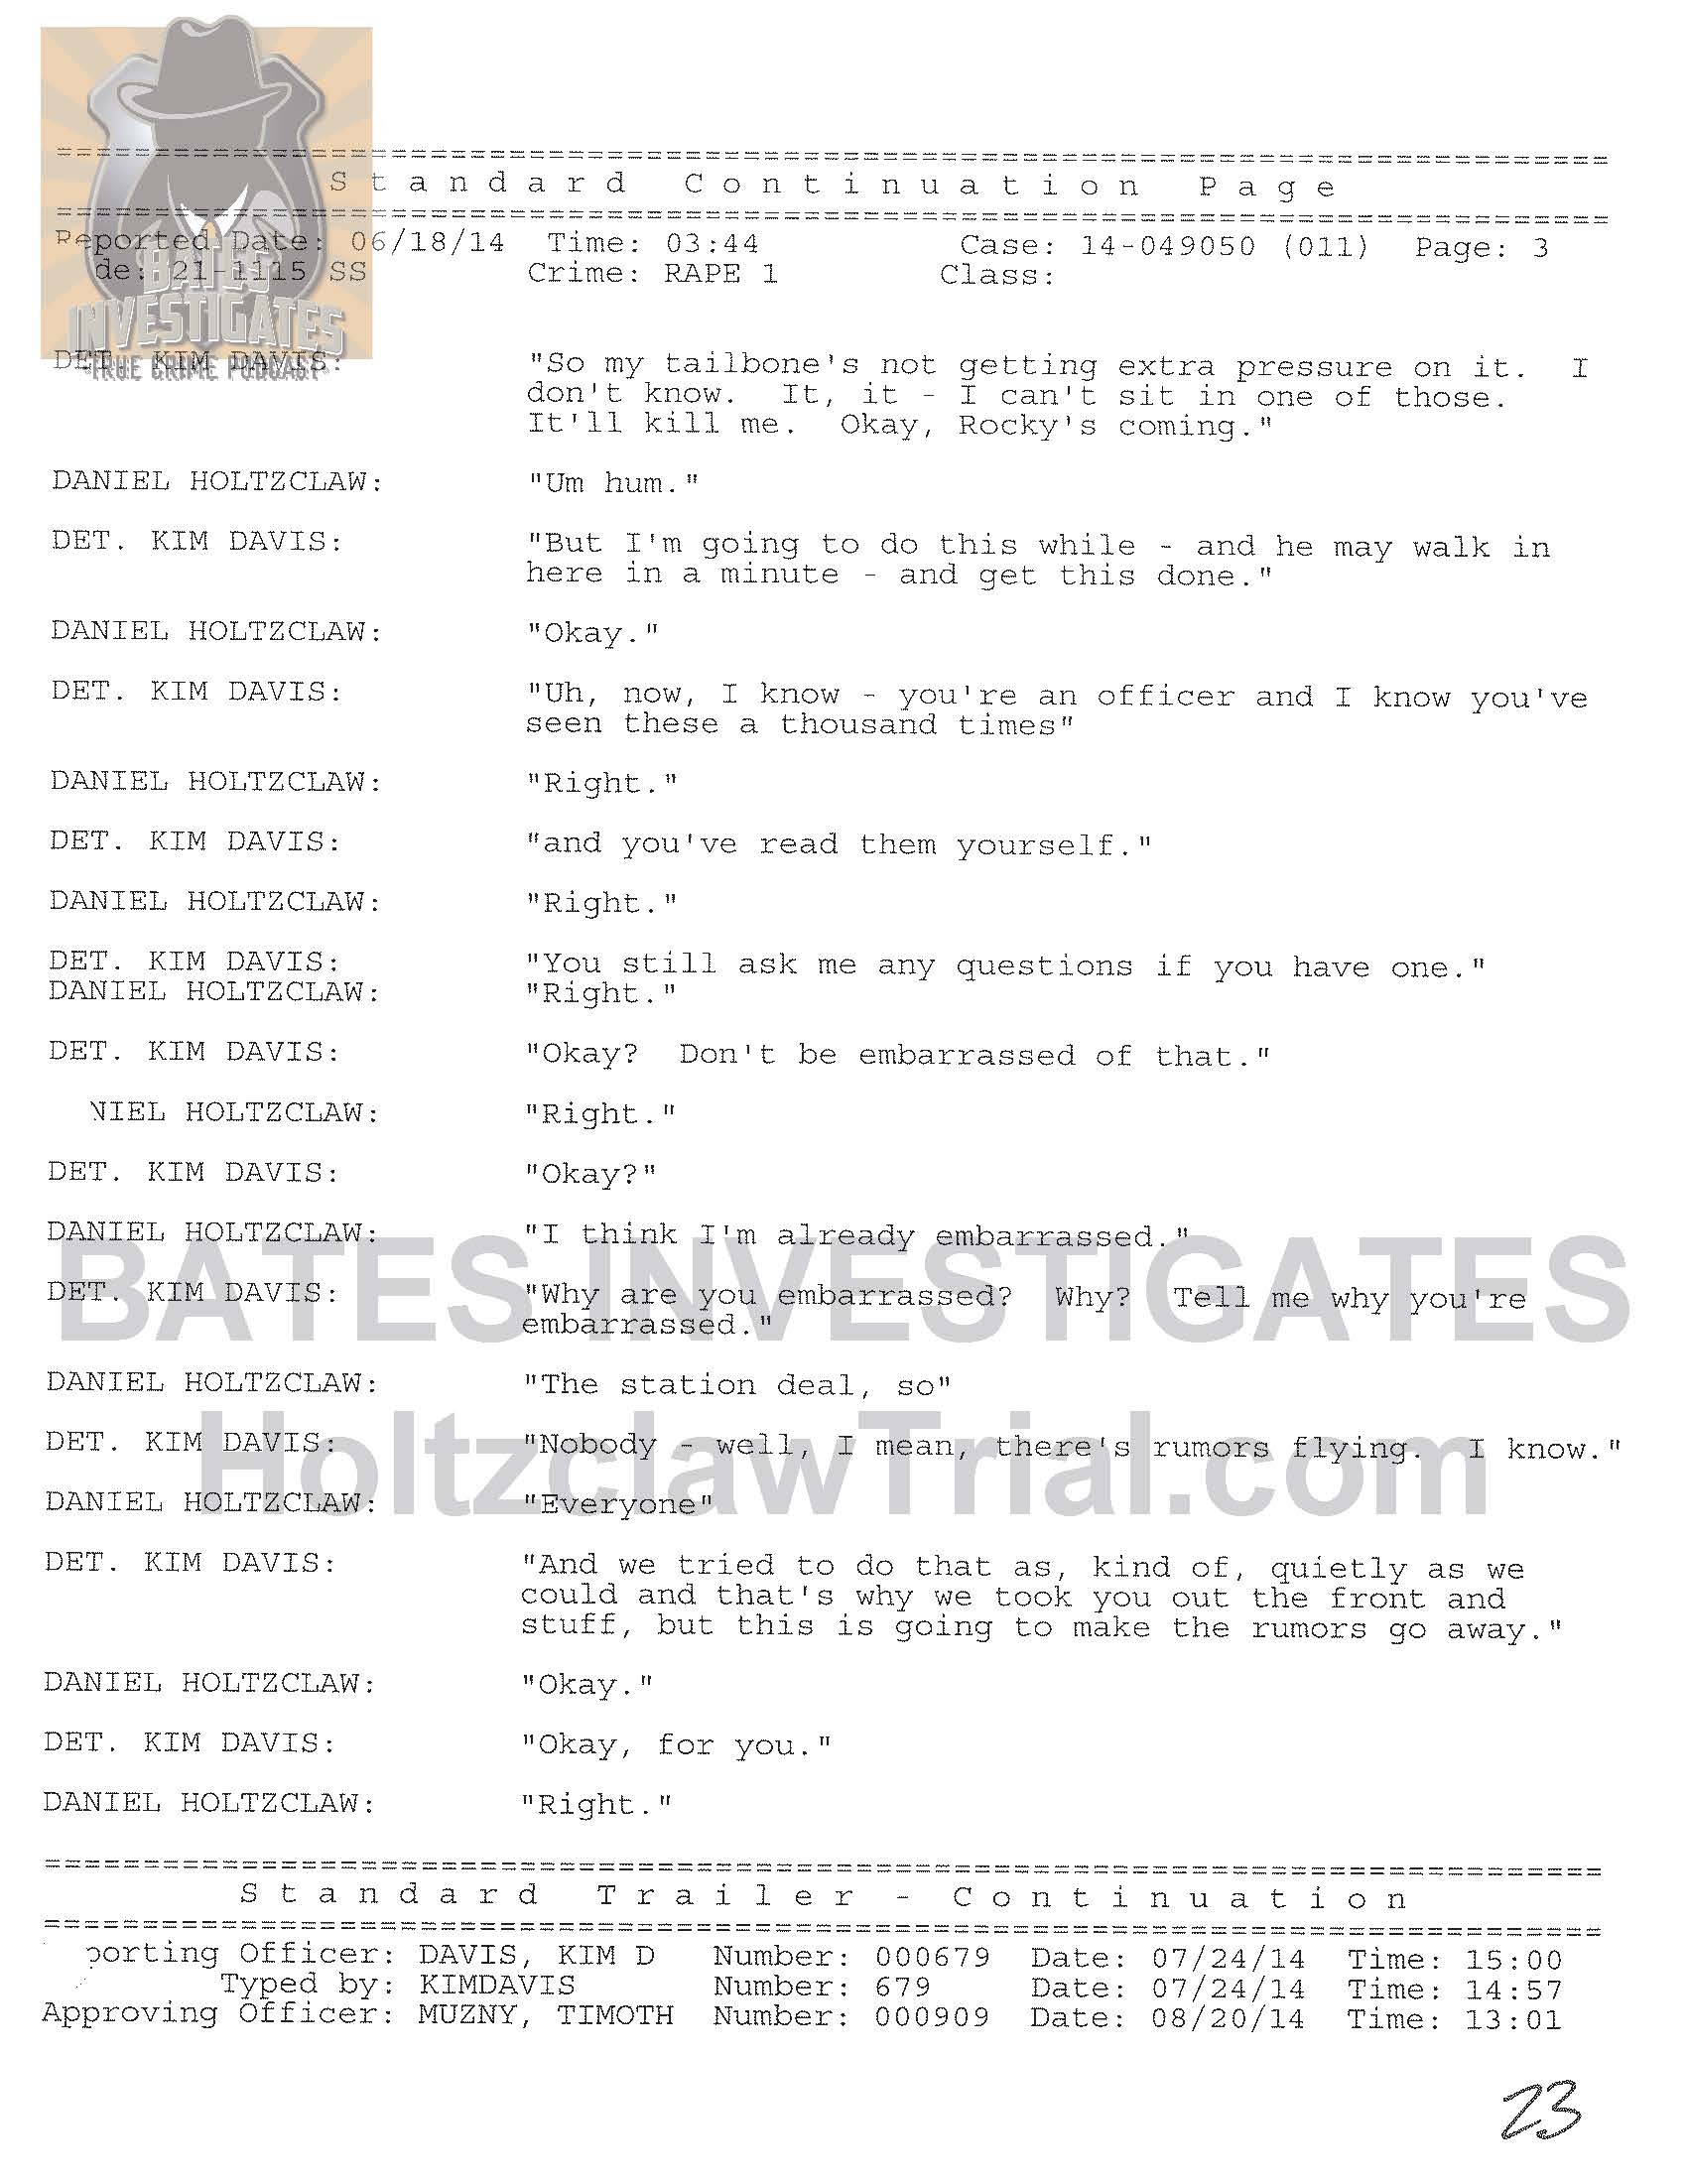 Holtzclaw Interrogation Transcript - Ep02 Redacted_Page_03.jpg